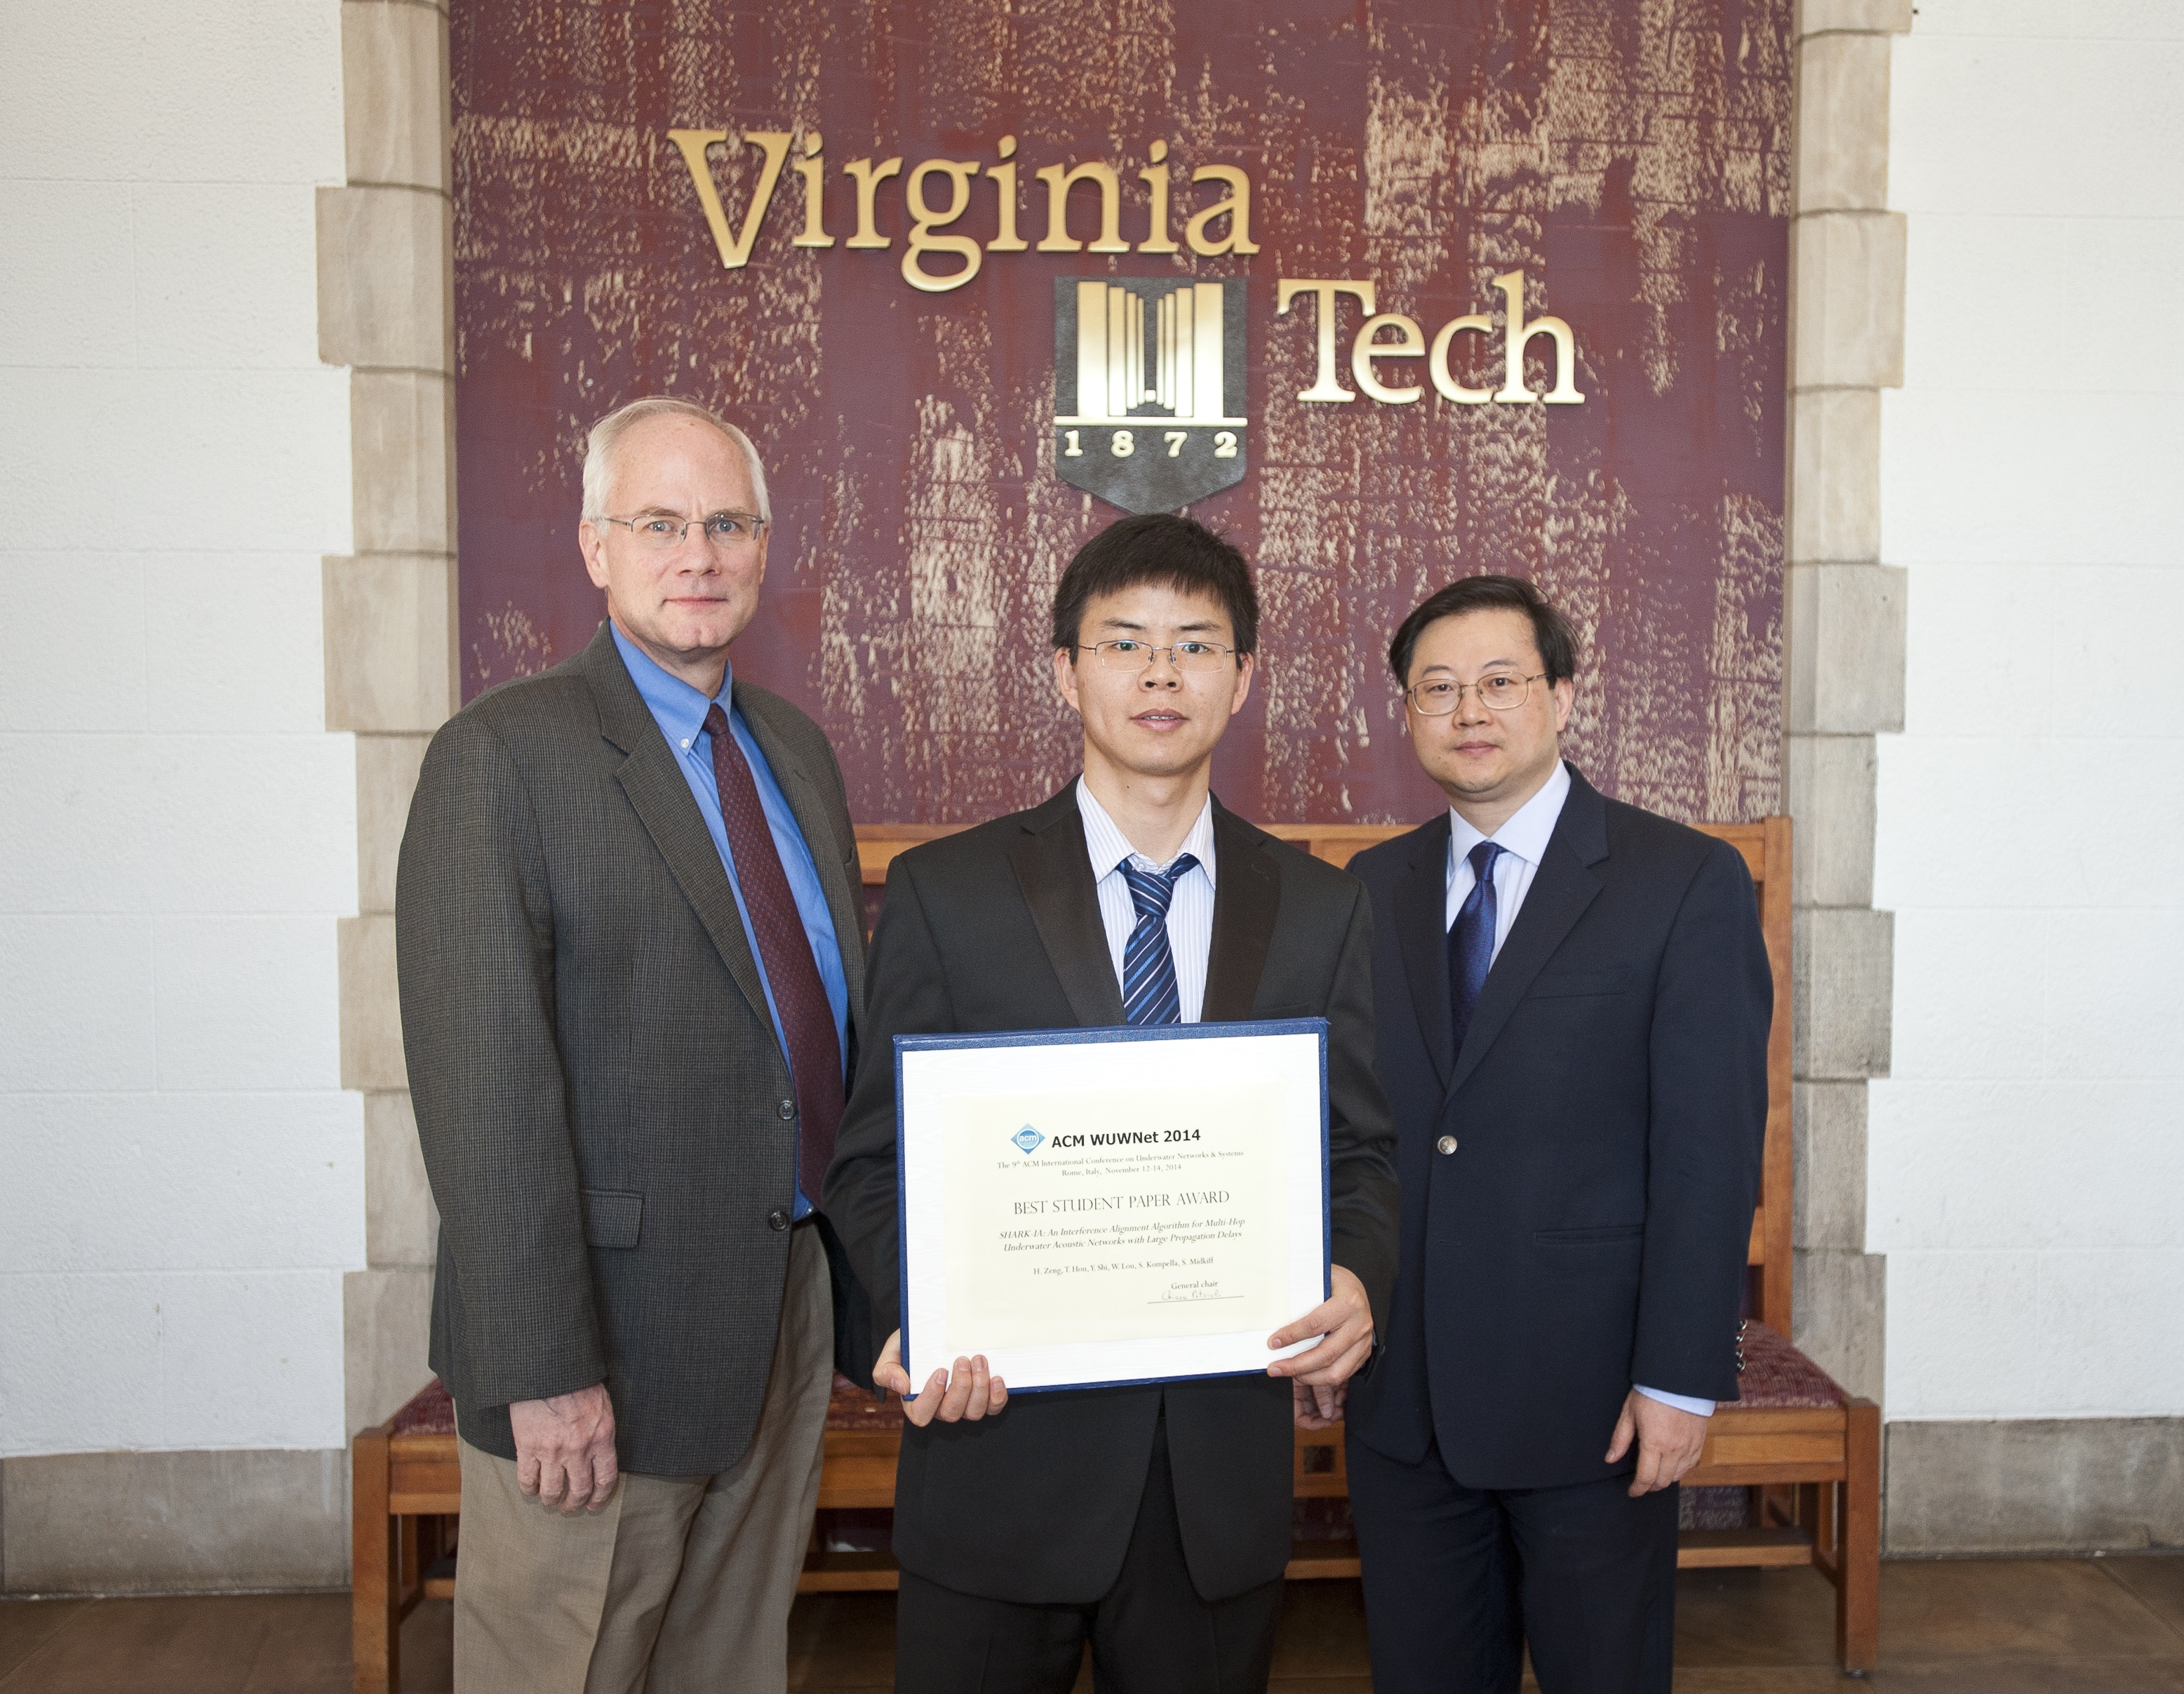 Virginia Tech ECE doctoral student wins award at international conference